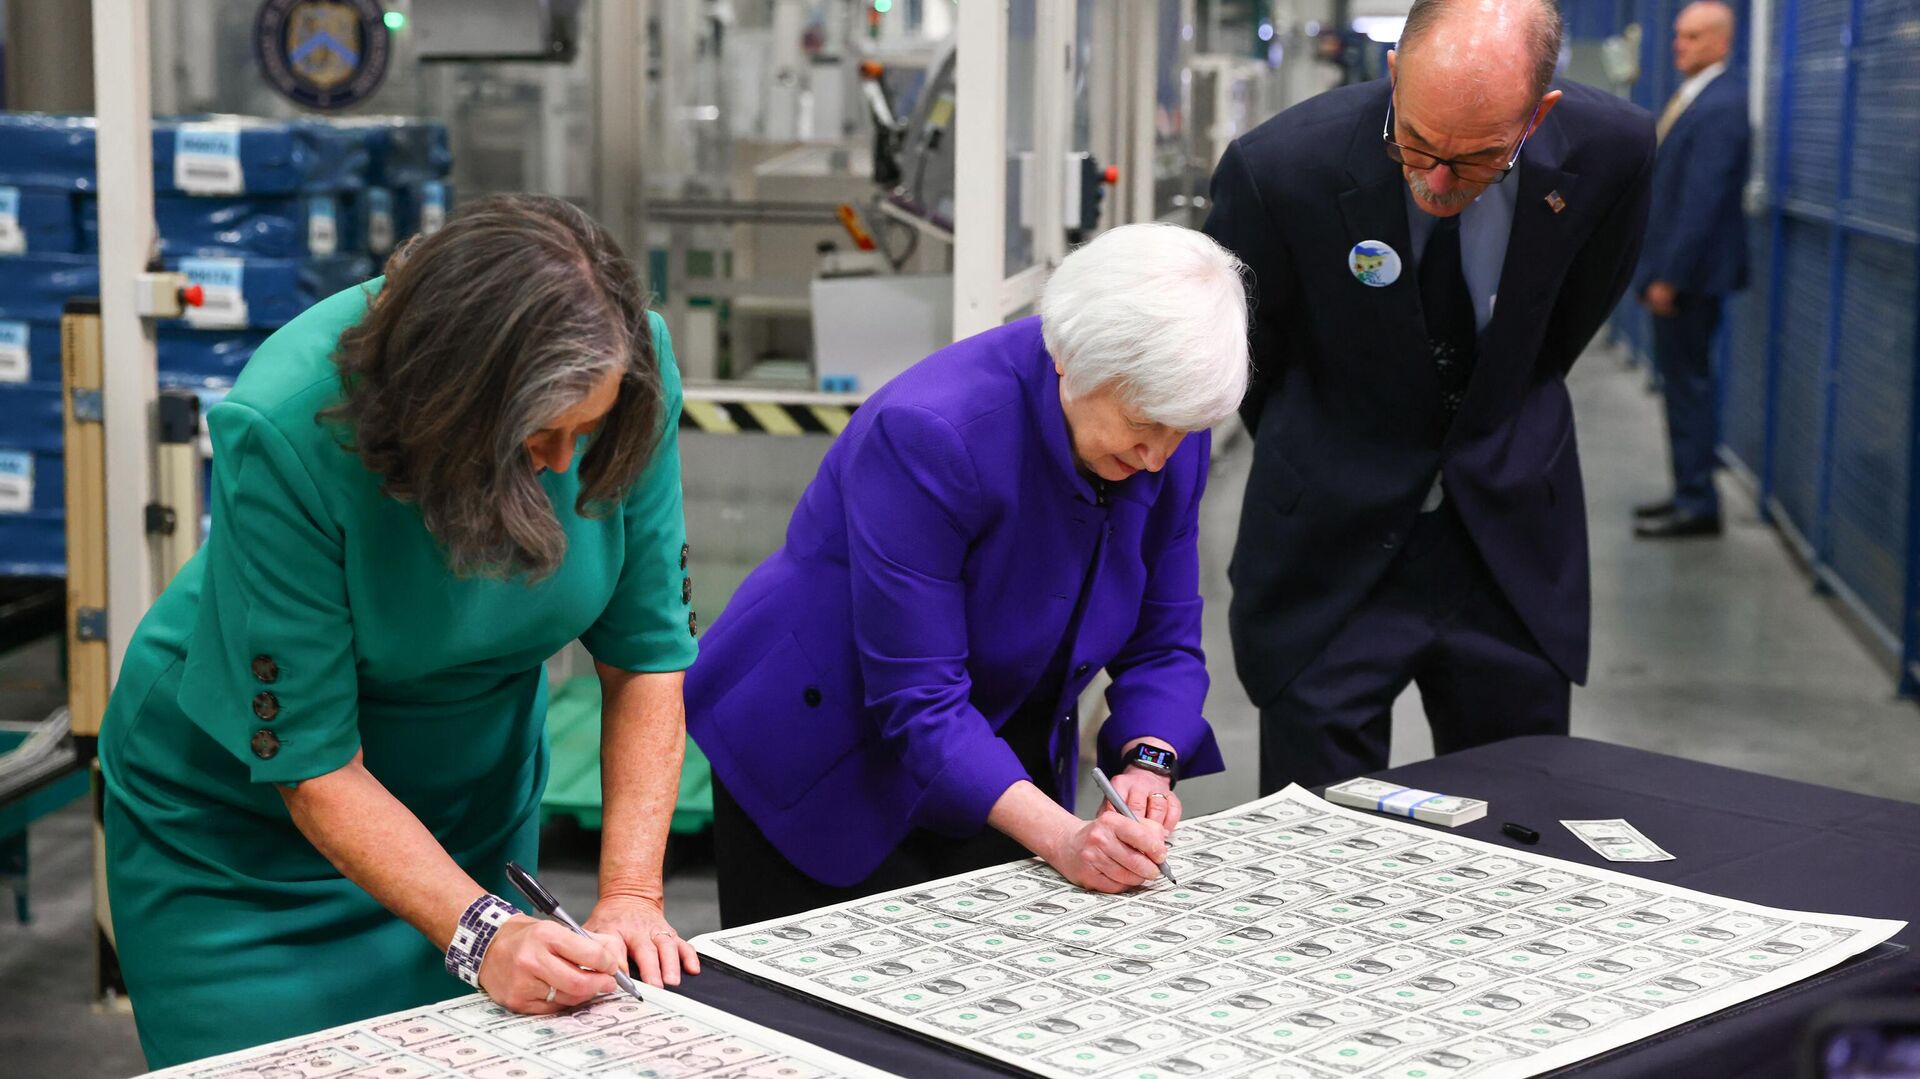 Bureau of Engraving and Printing Director Leonard Olijar (R) watches as US Treasury Secretary Janet Yellen (C) and Treasurer Marilynn Malerba sign one dollar bills at the Bureau of Engraving and Printing Western Currency Facility on December 8, 2022 in Fort Worth, Texas. - The US dollar will bear two women's signatures for the first time, belonging to Treasury Secretary Janet Yellen and Treasurer Lynn Malerba, officials said Thursday as they unveiled the banknotes.  - Sputnik International, 1920, 13.04.2023